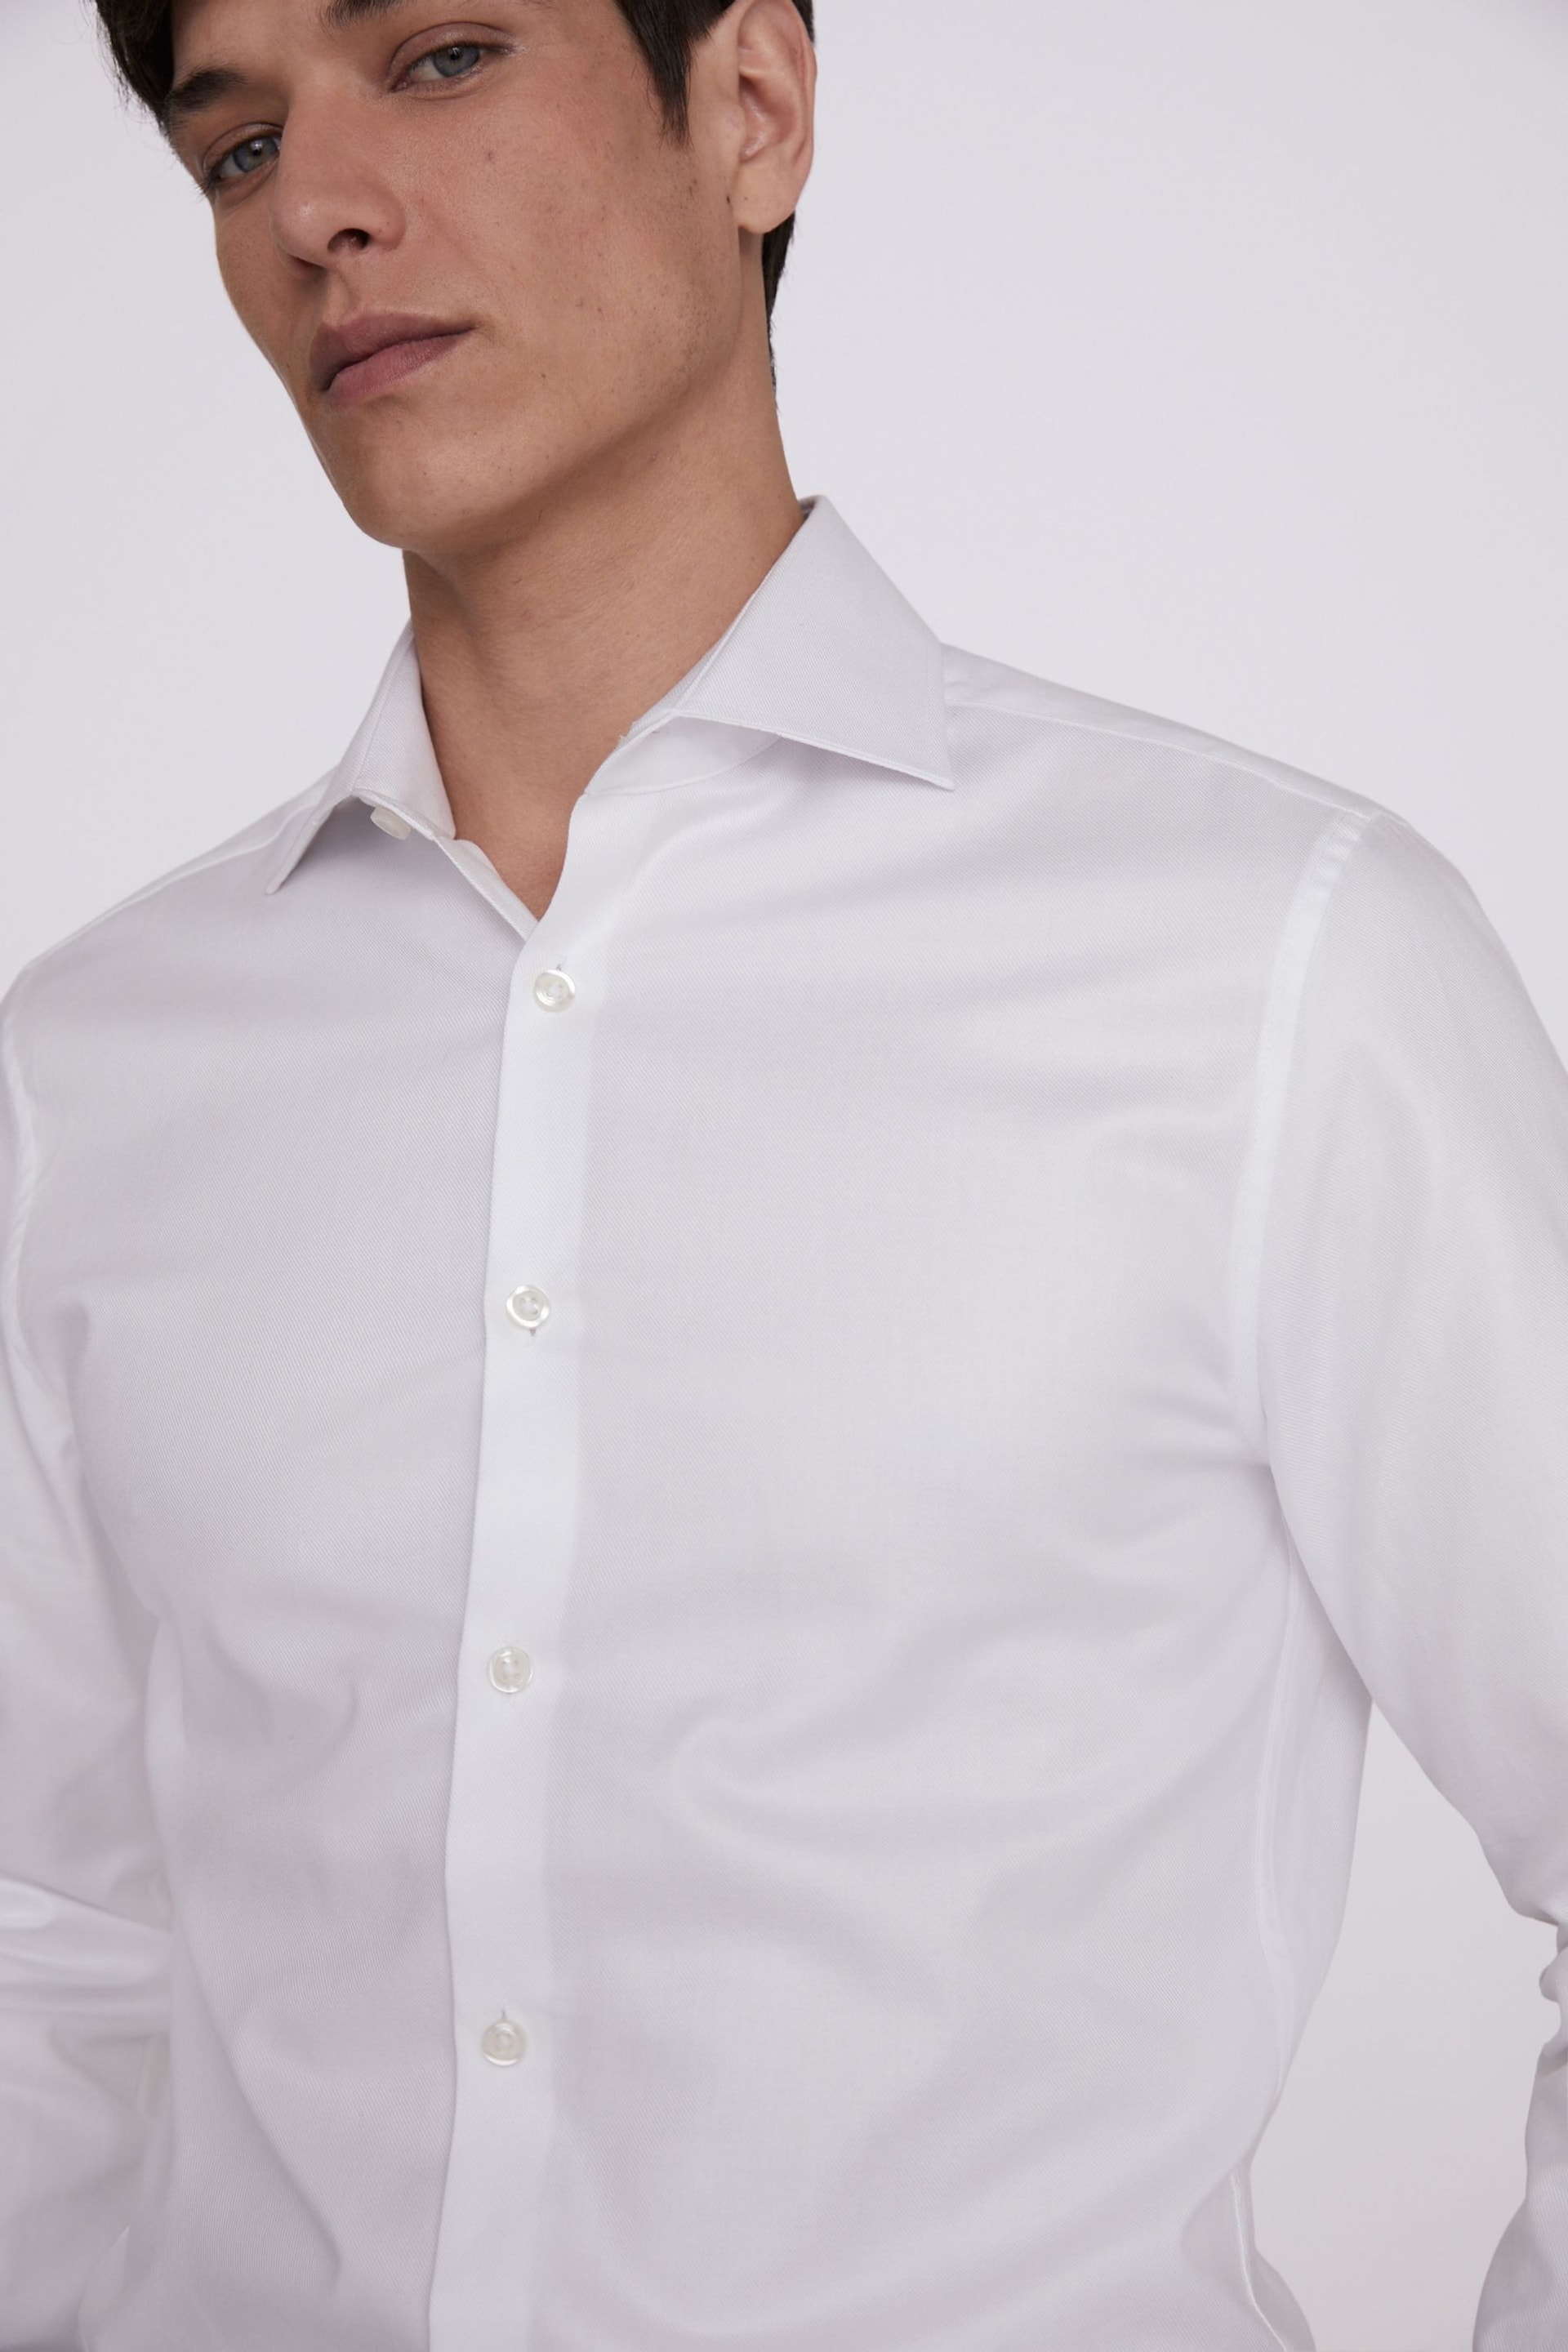 Double Cuff Twill White Shirt - Image 2 of 4